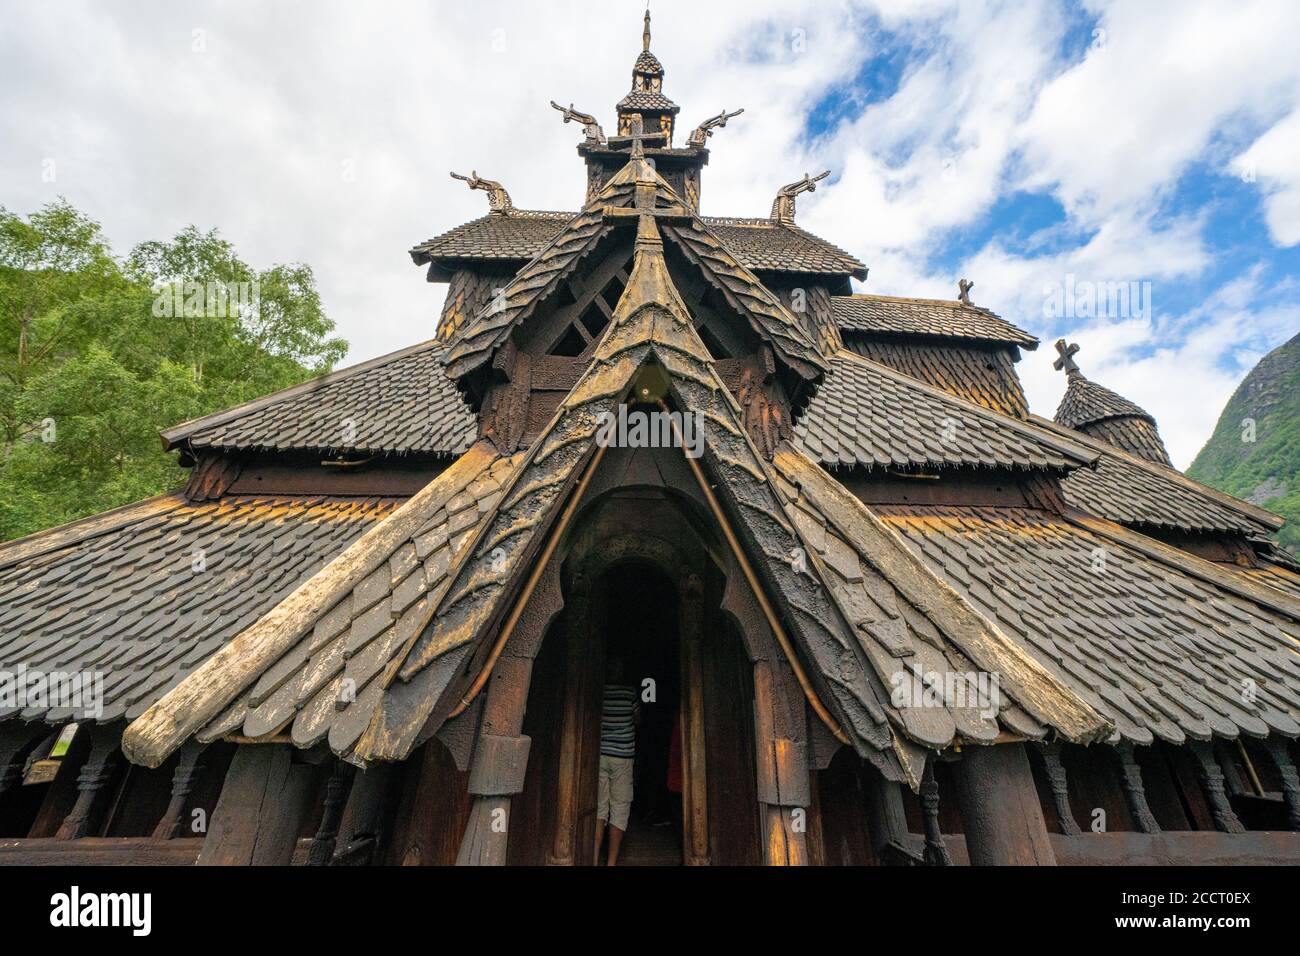 Fantastical roof structure of Borgund stave church at the head of Laerdale in Vestland central Norway built entirely of wood in the 12th century Stock Photo